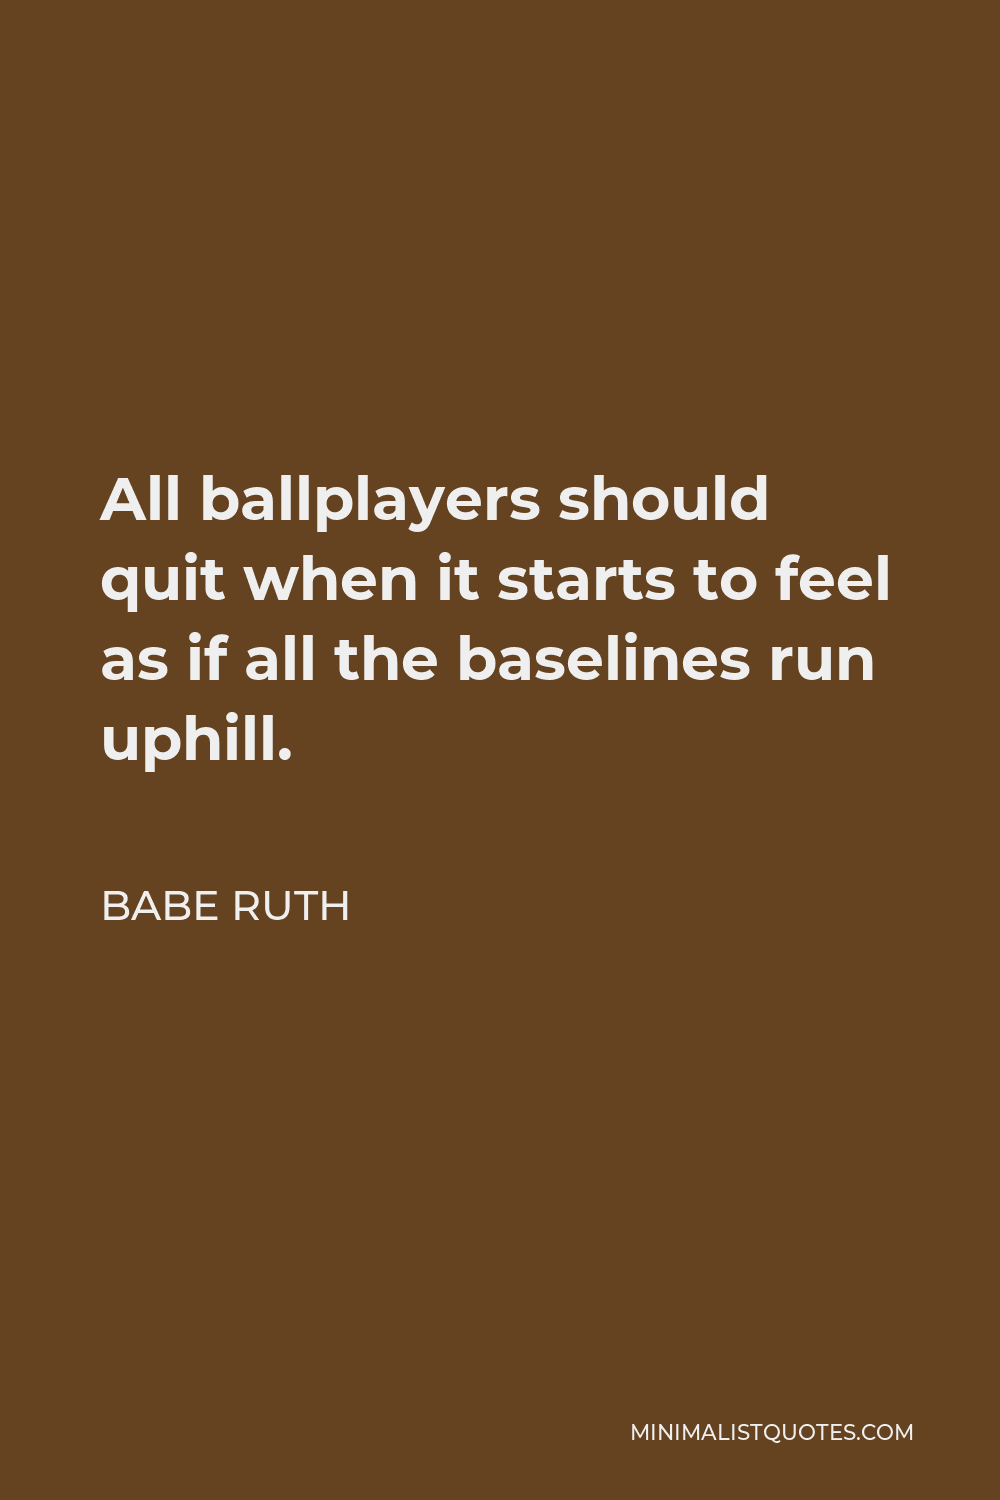 Babe Ruth Quote - All ballplayers should quit when it starts to feel as if all the baselines run uphill.